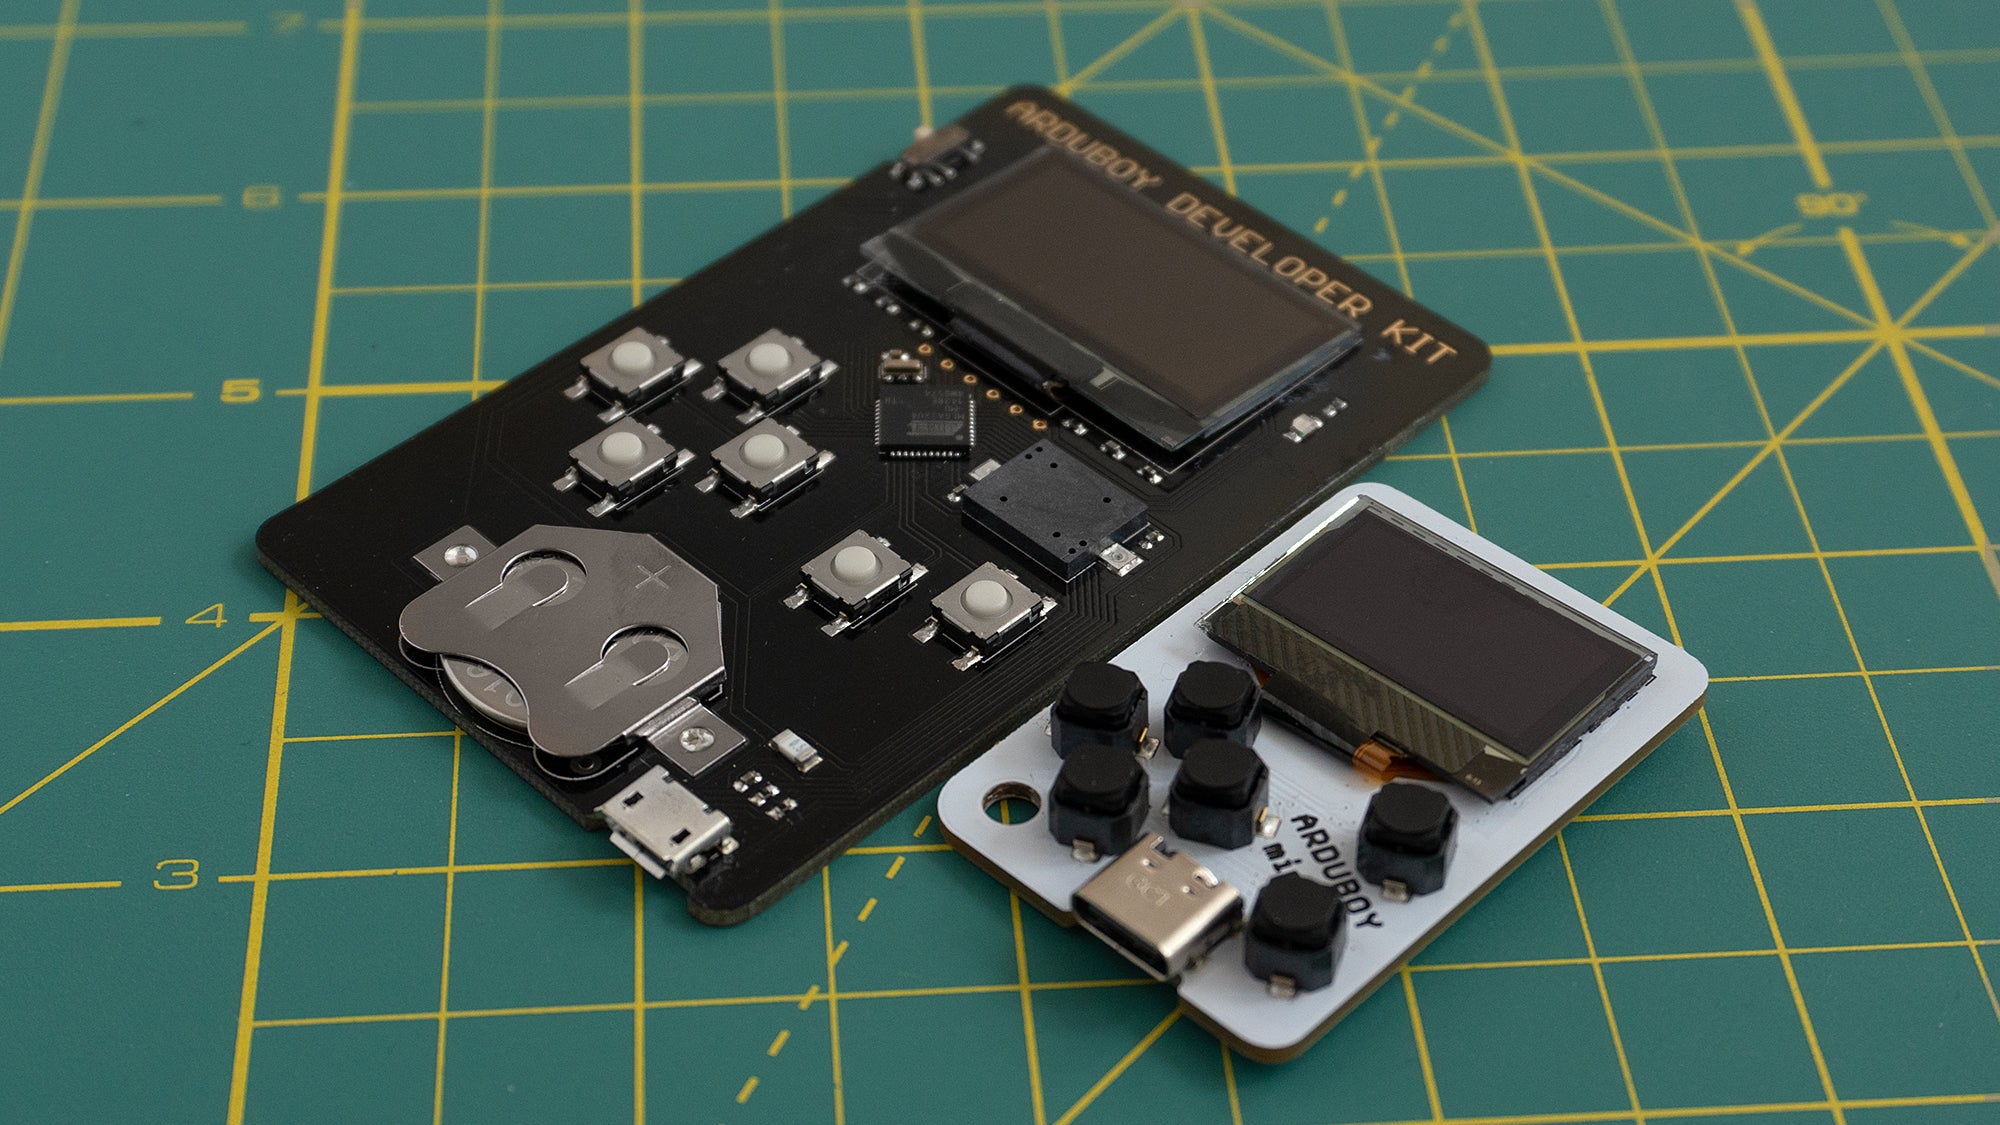 The Arduboy Mini (right) compared to the Arduboy Development Kit (left) which both feature a caseless design with exposed electronics. (Photo: Andrew Liszewski | Gizmodo)